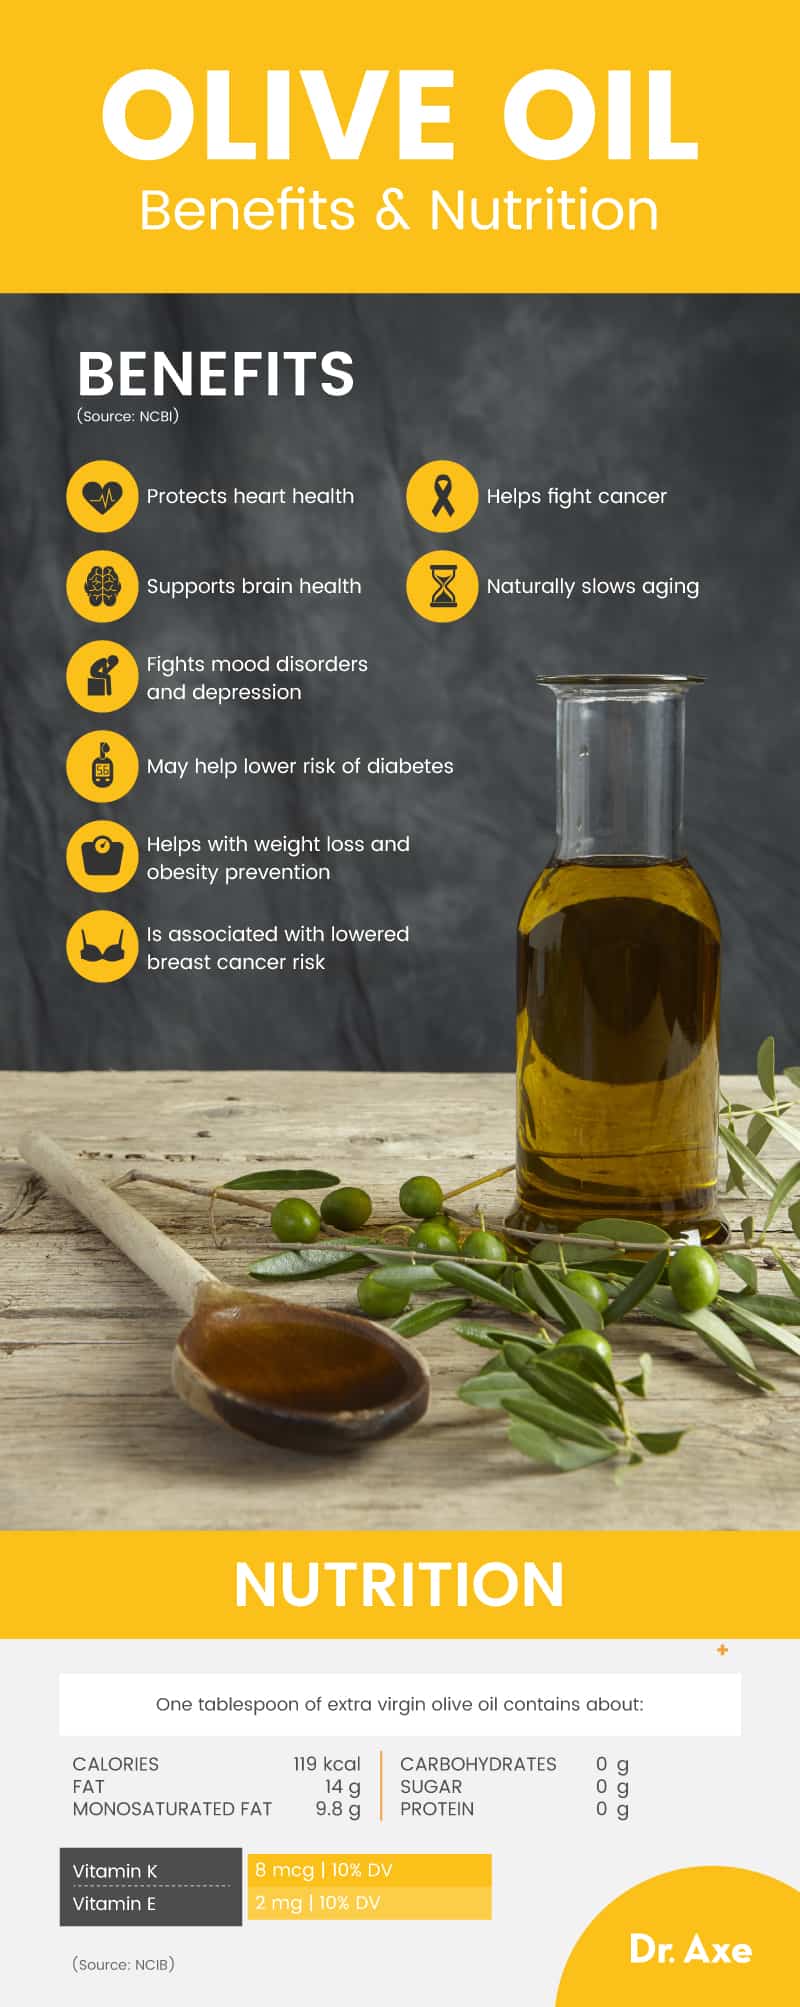 Olive oil benefits - Dr. Axe